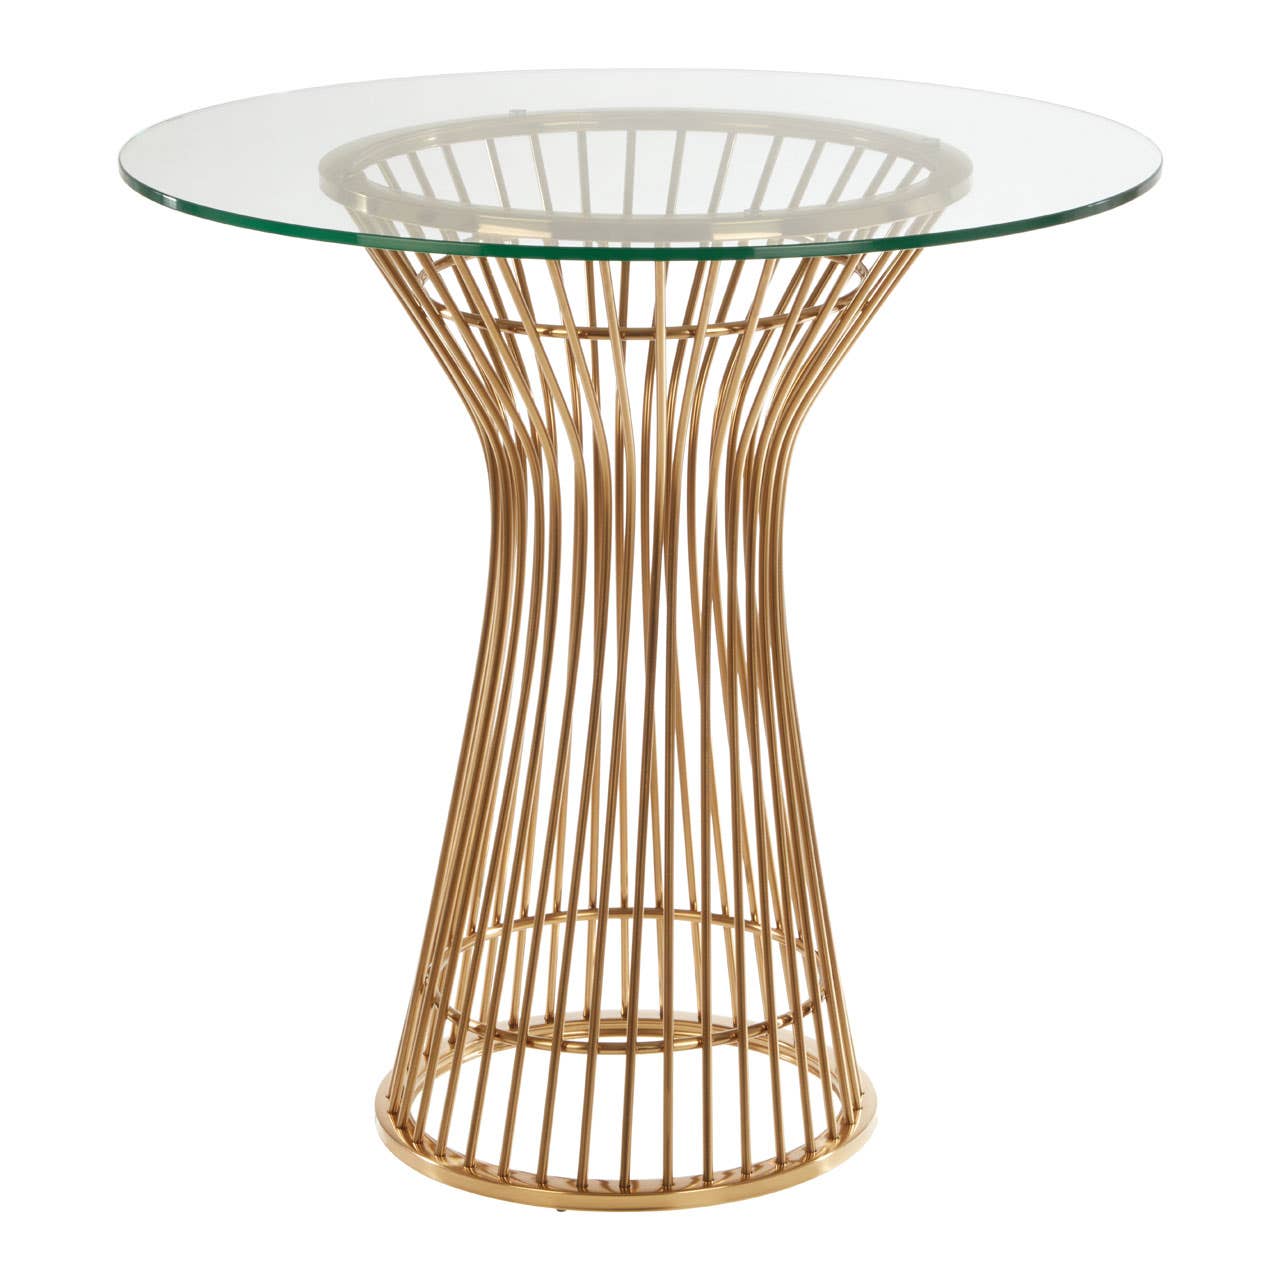 VOGUE ROUND DINING TABLE